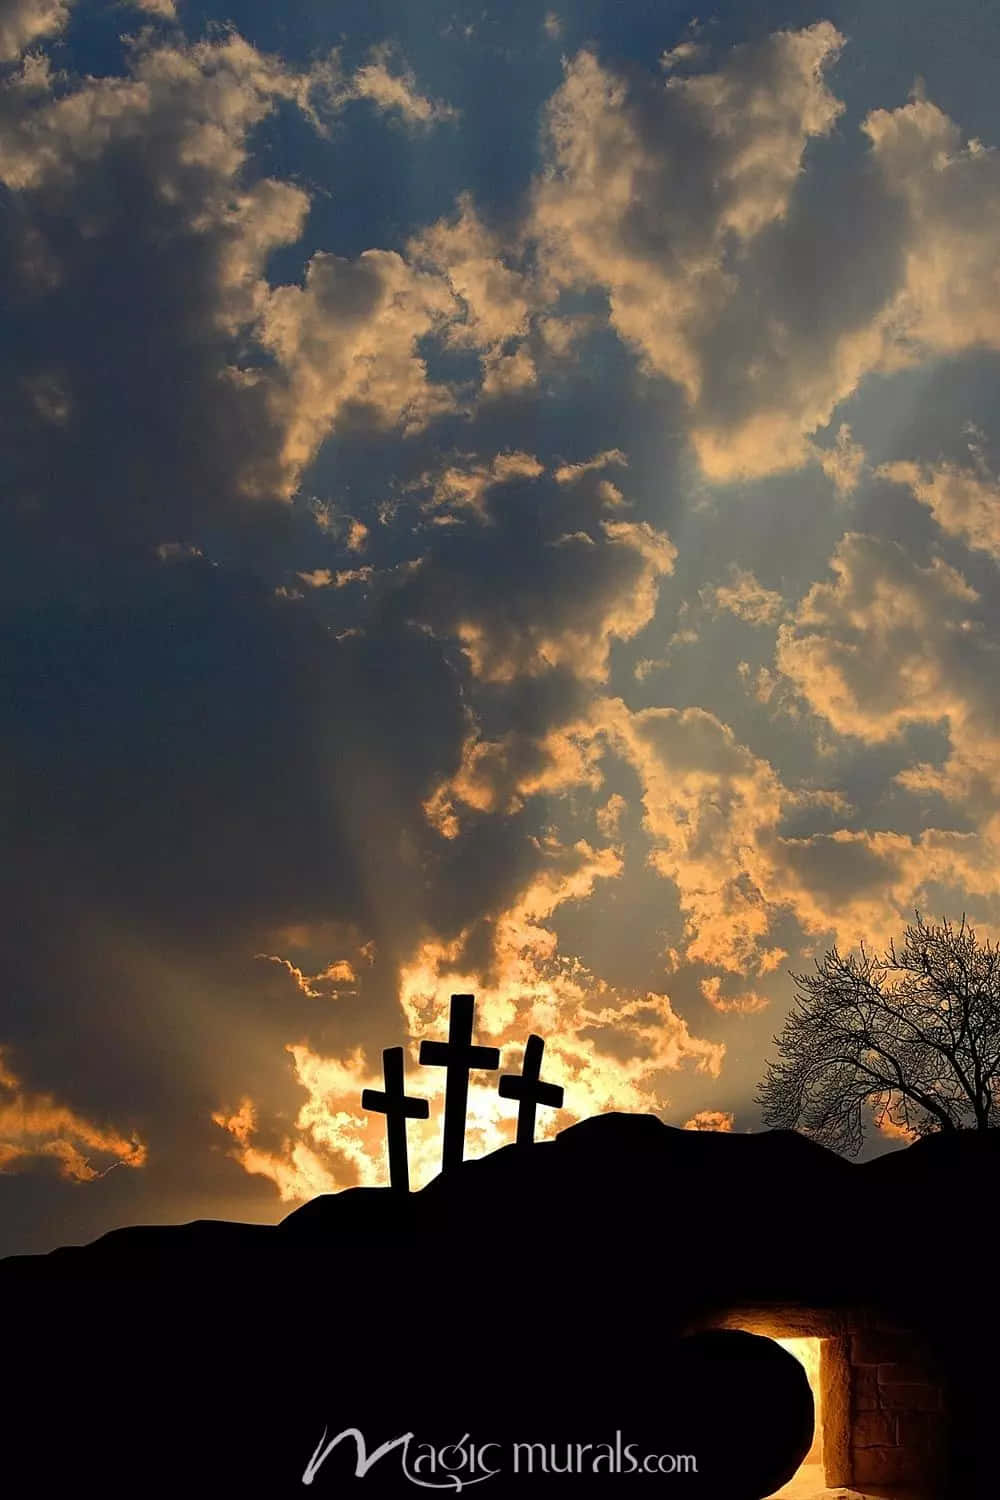 A Silhouette Of A Cross In The Sky